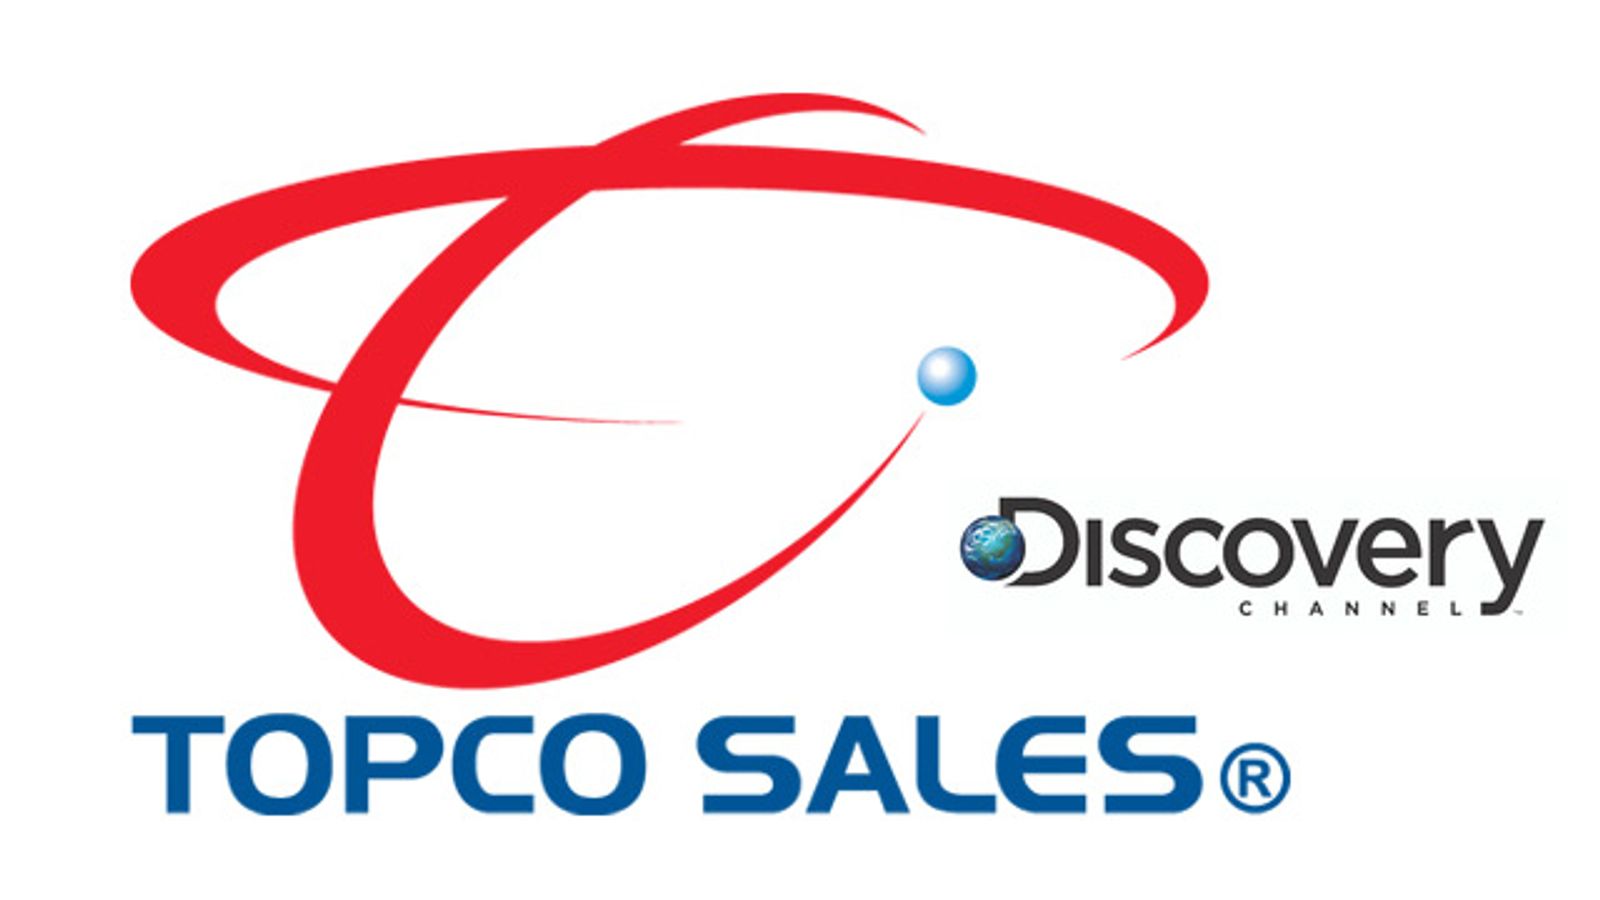 Topco Sales to Appear in Discovery Channel Documentary